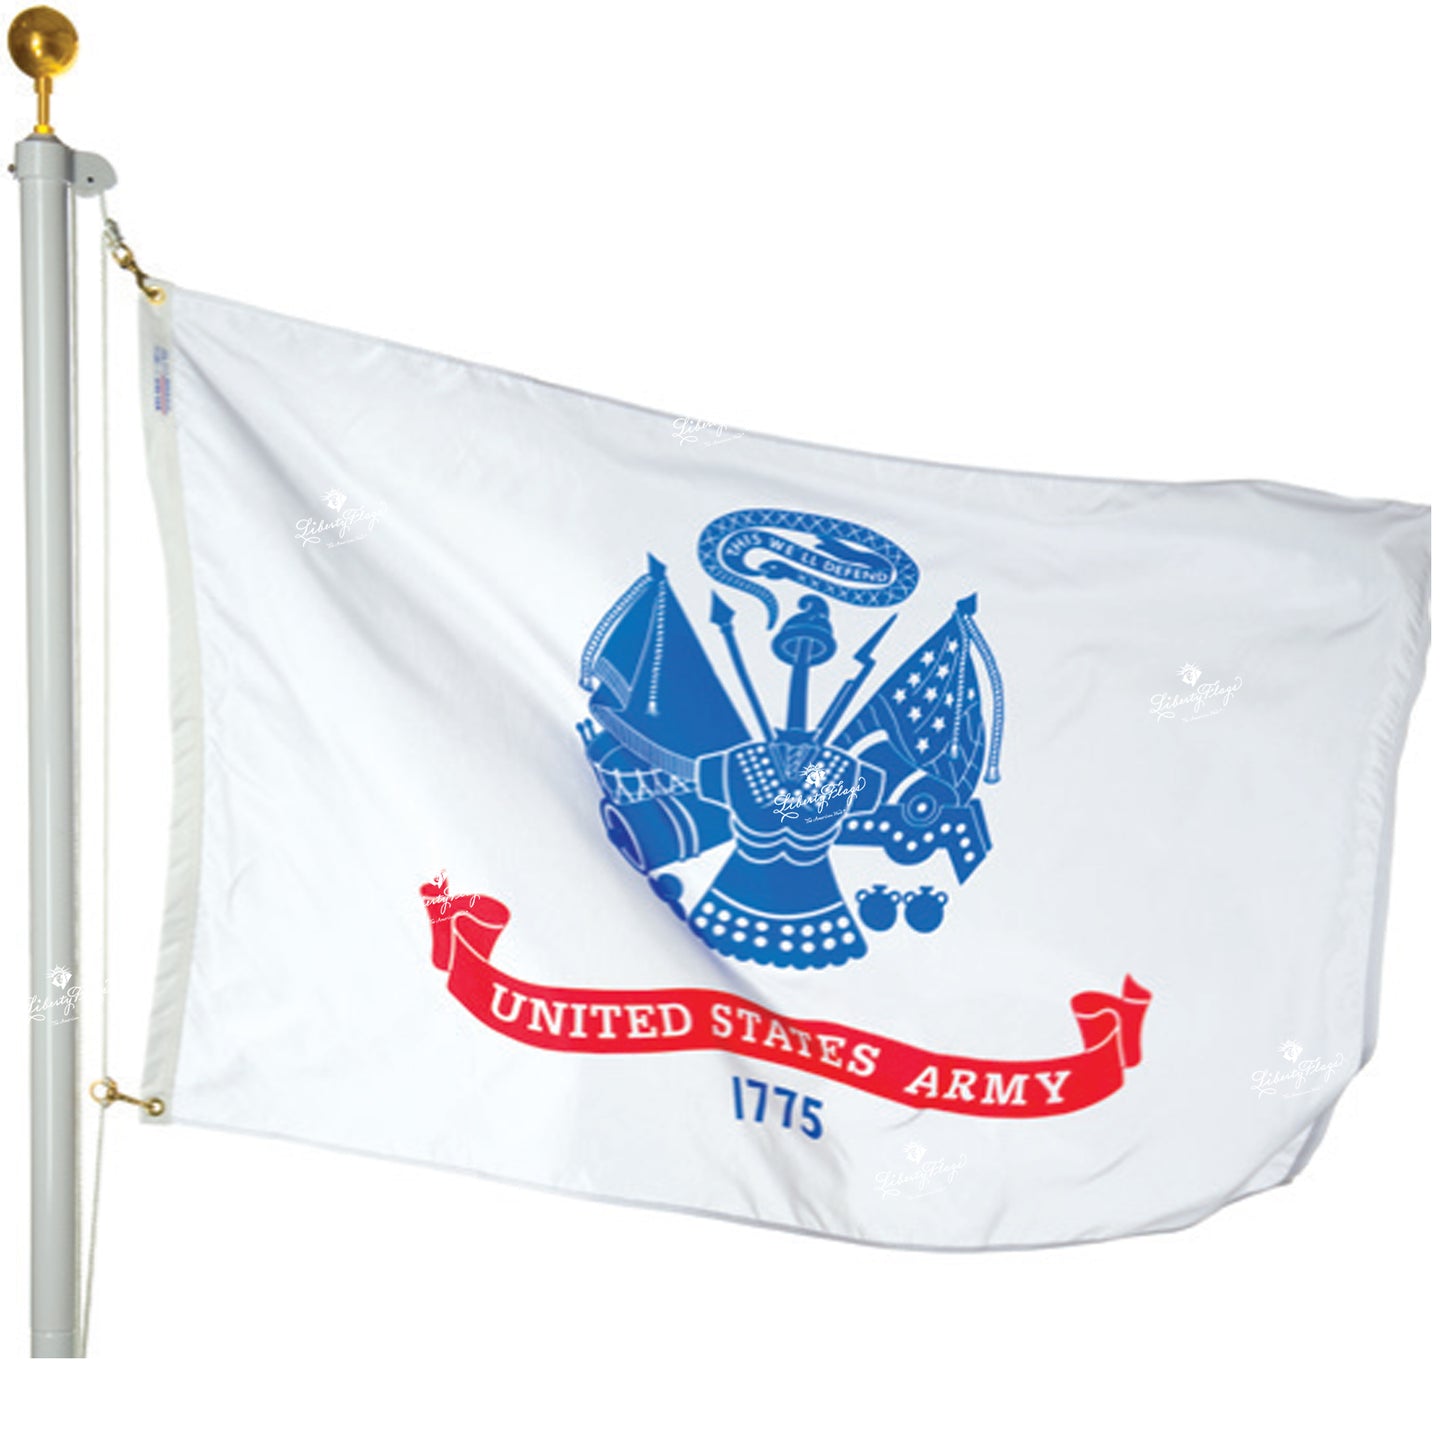 Army Polyester Outdoor Flags